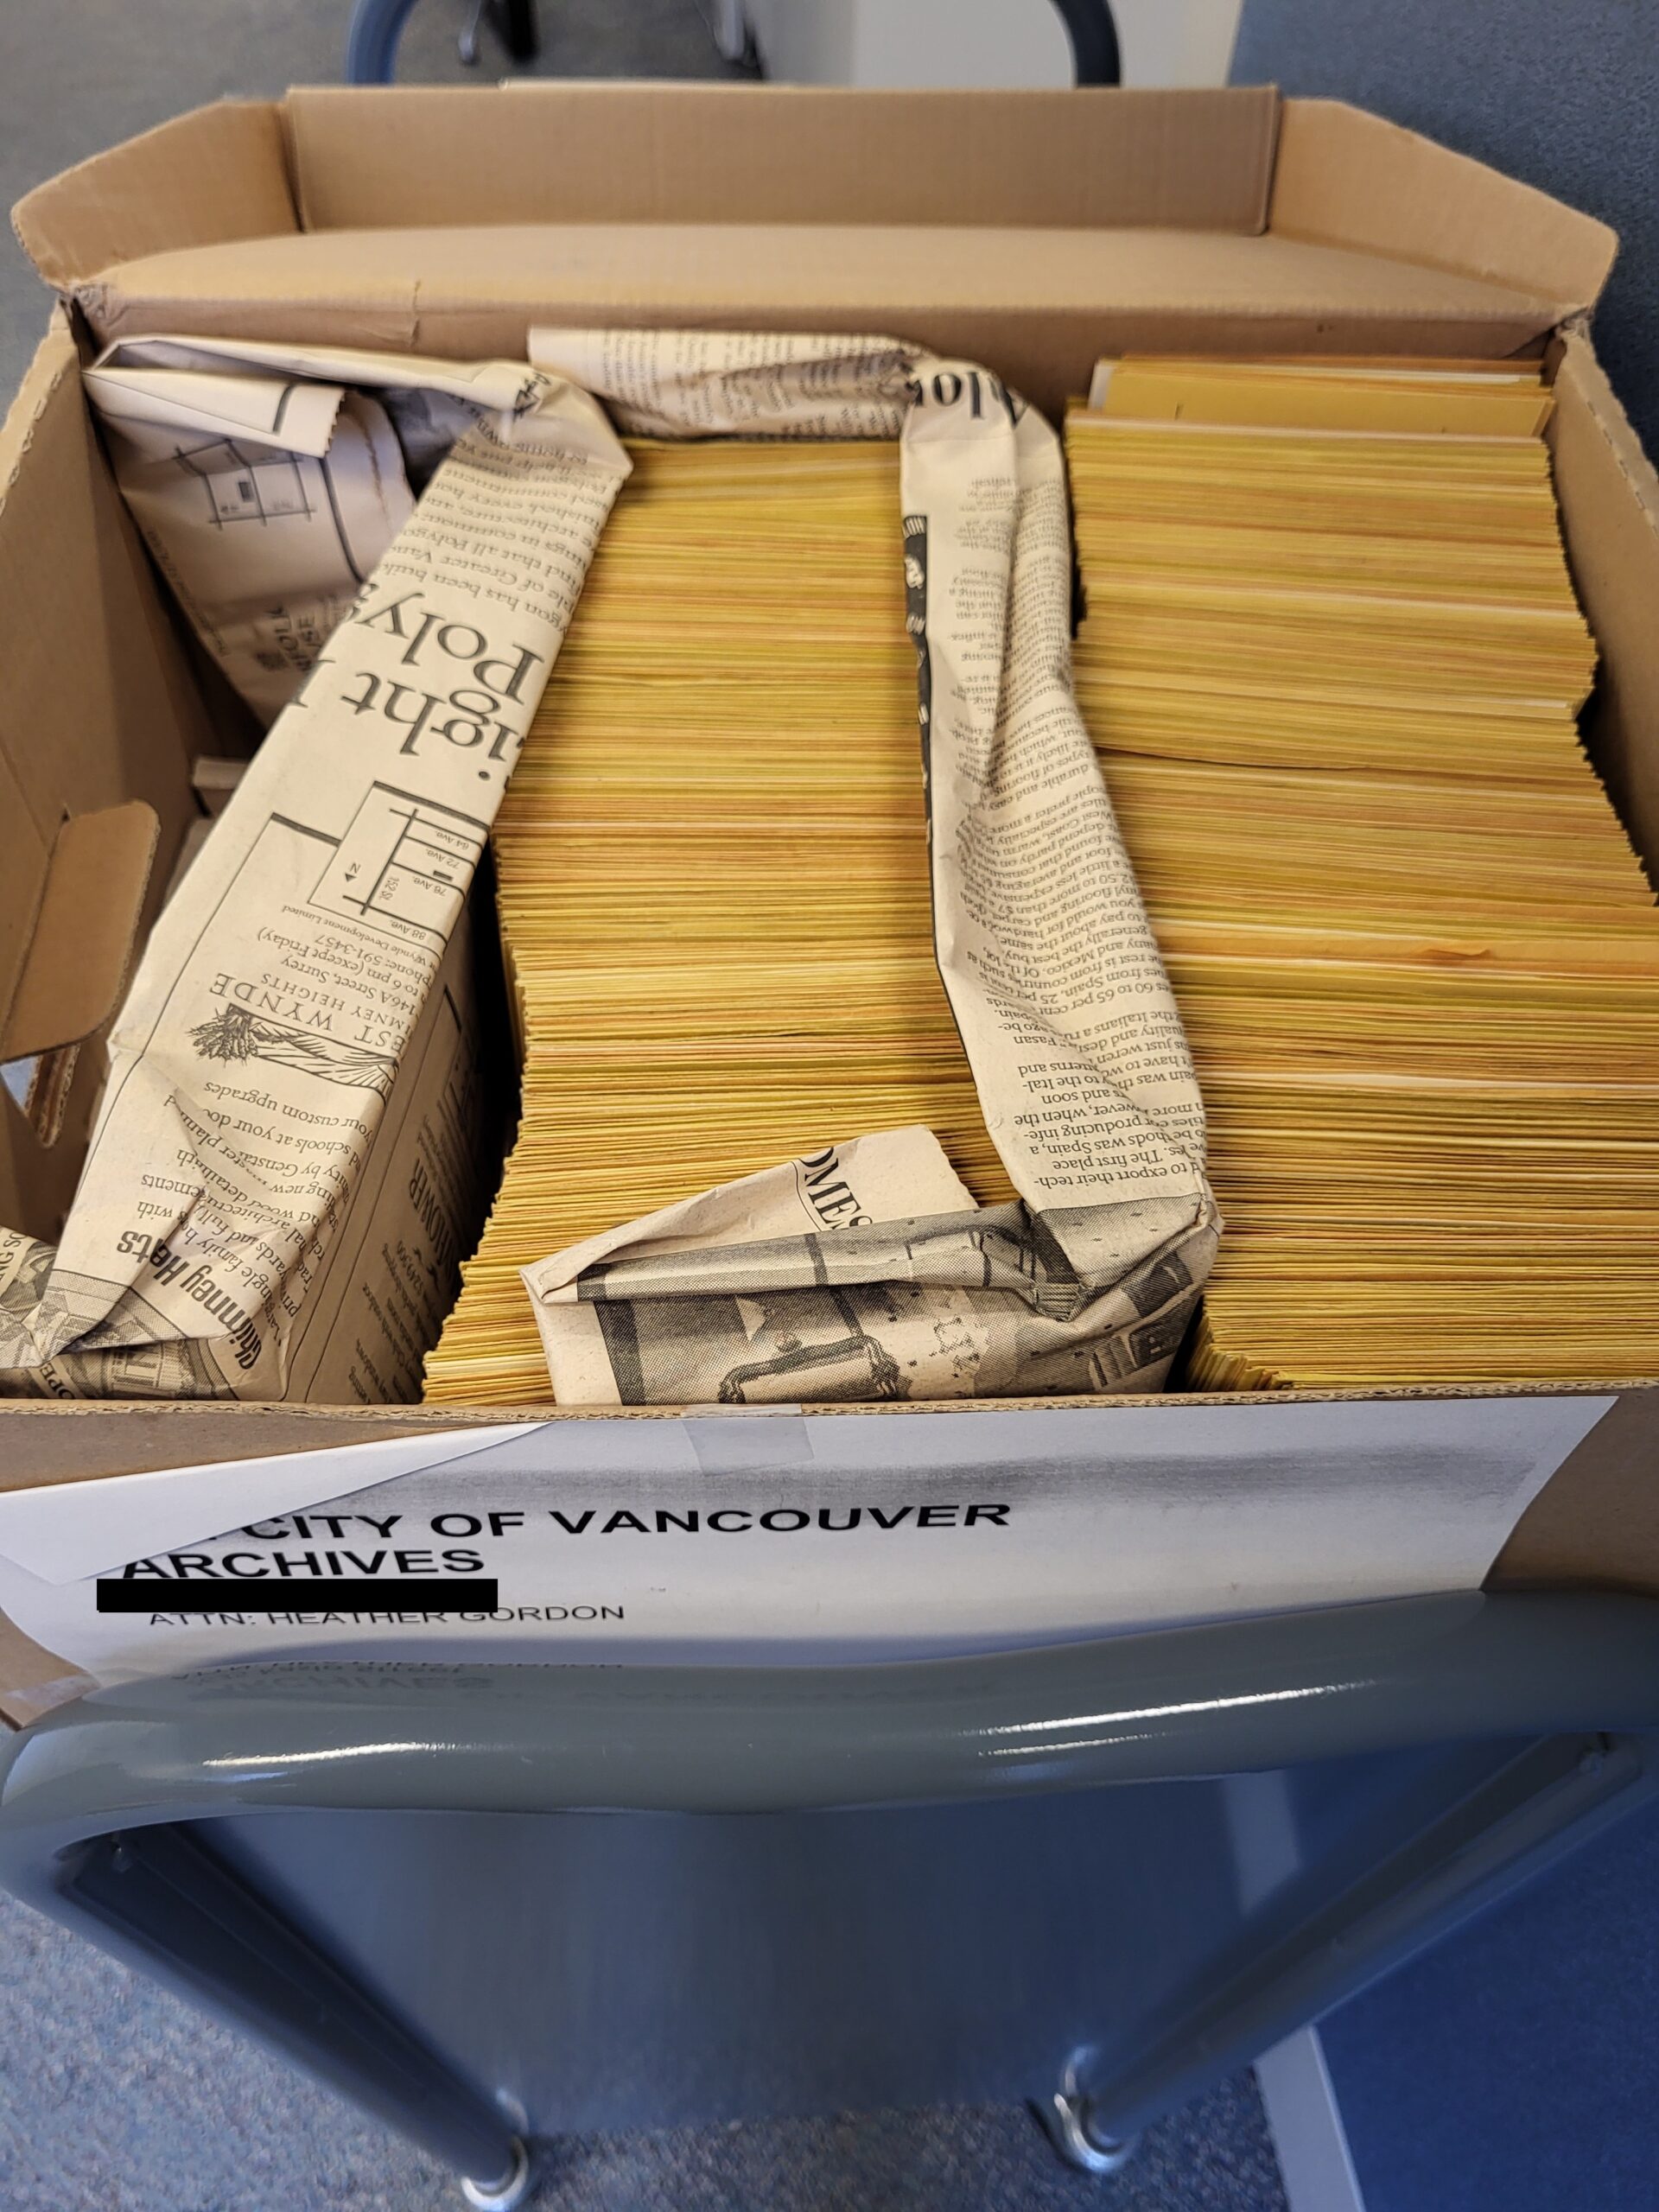 The “Before” state—a banker’s box full of photo assignment envelopes